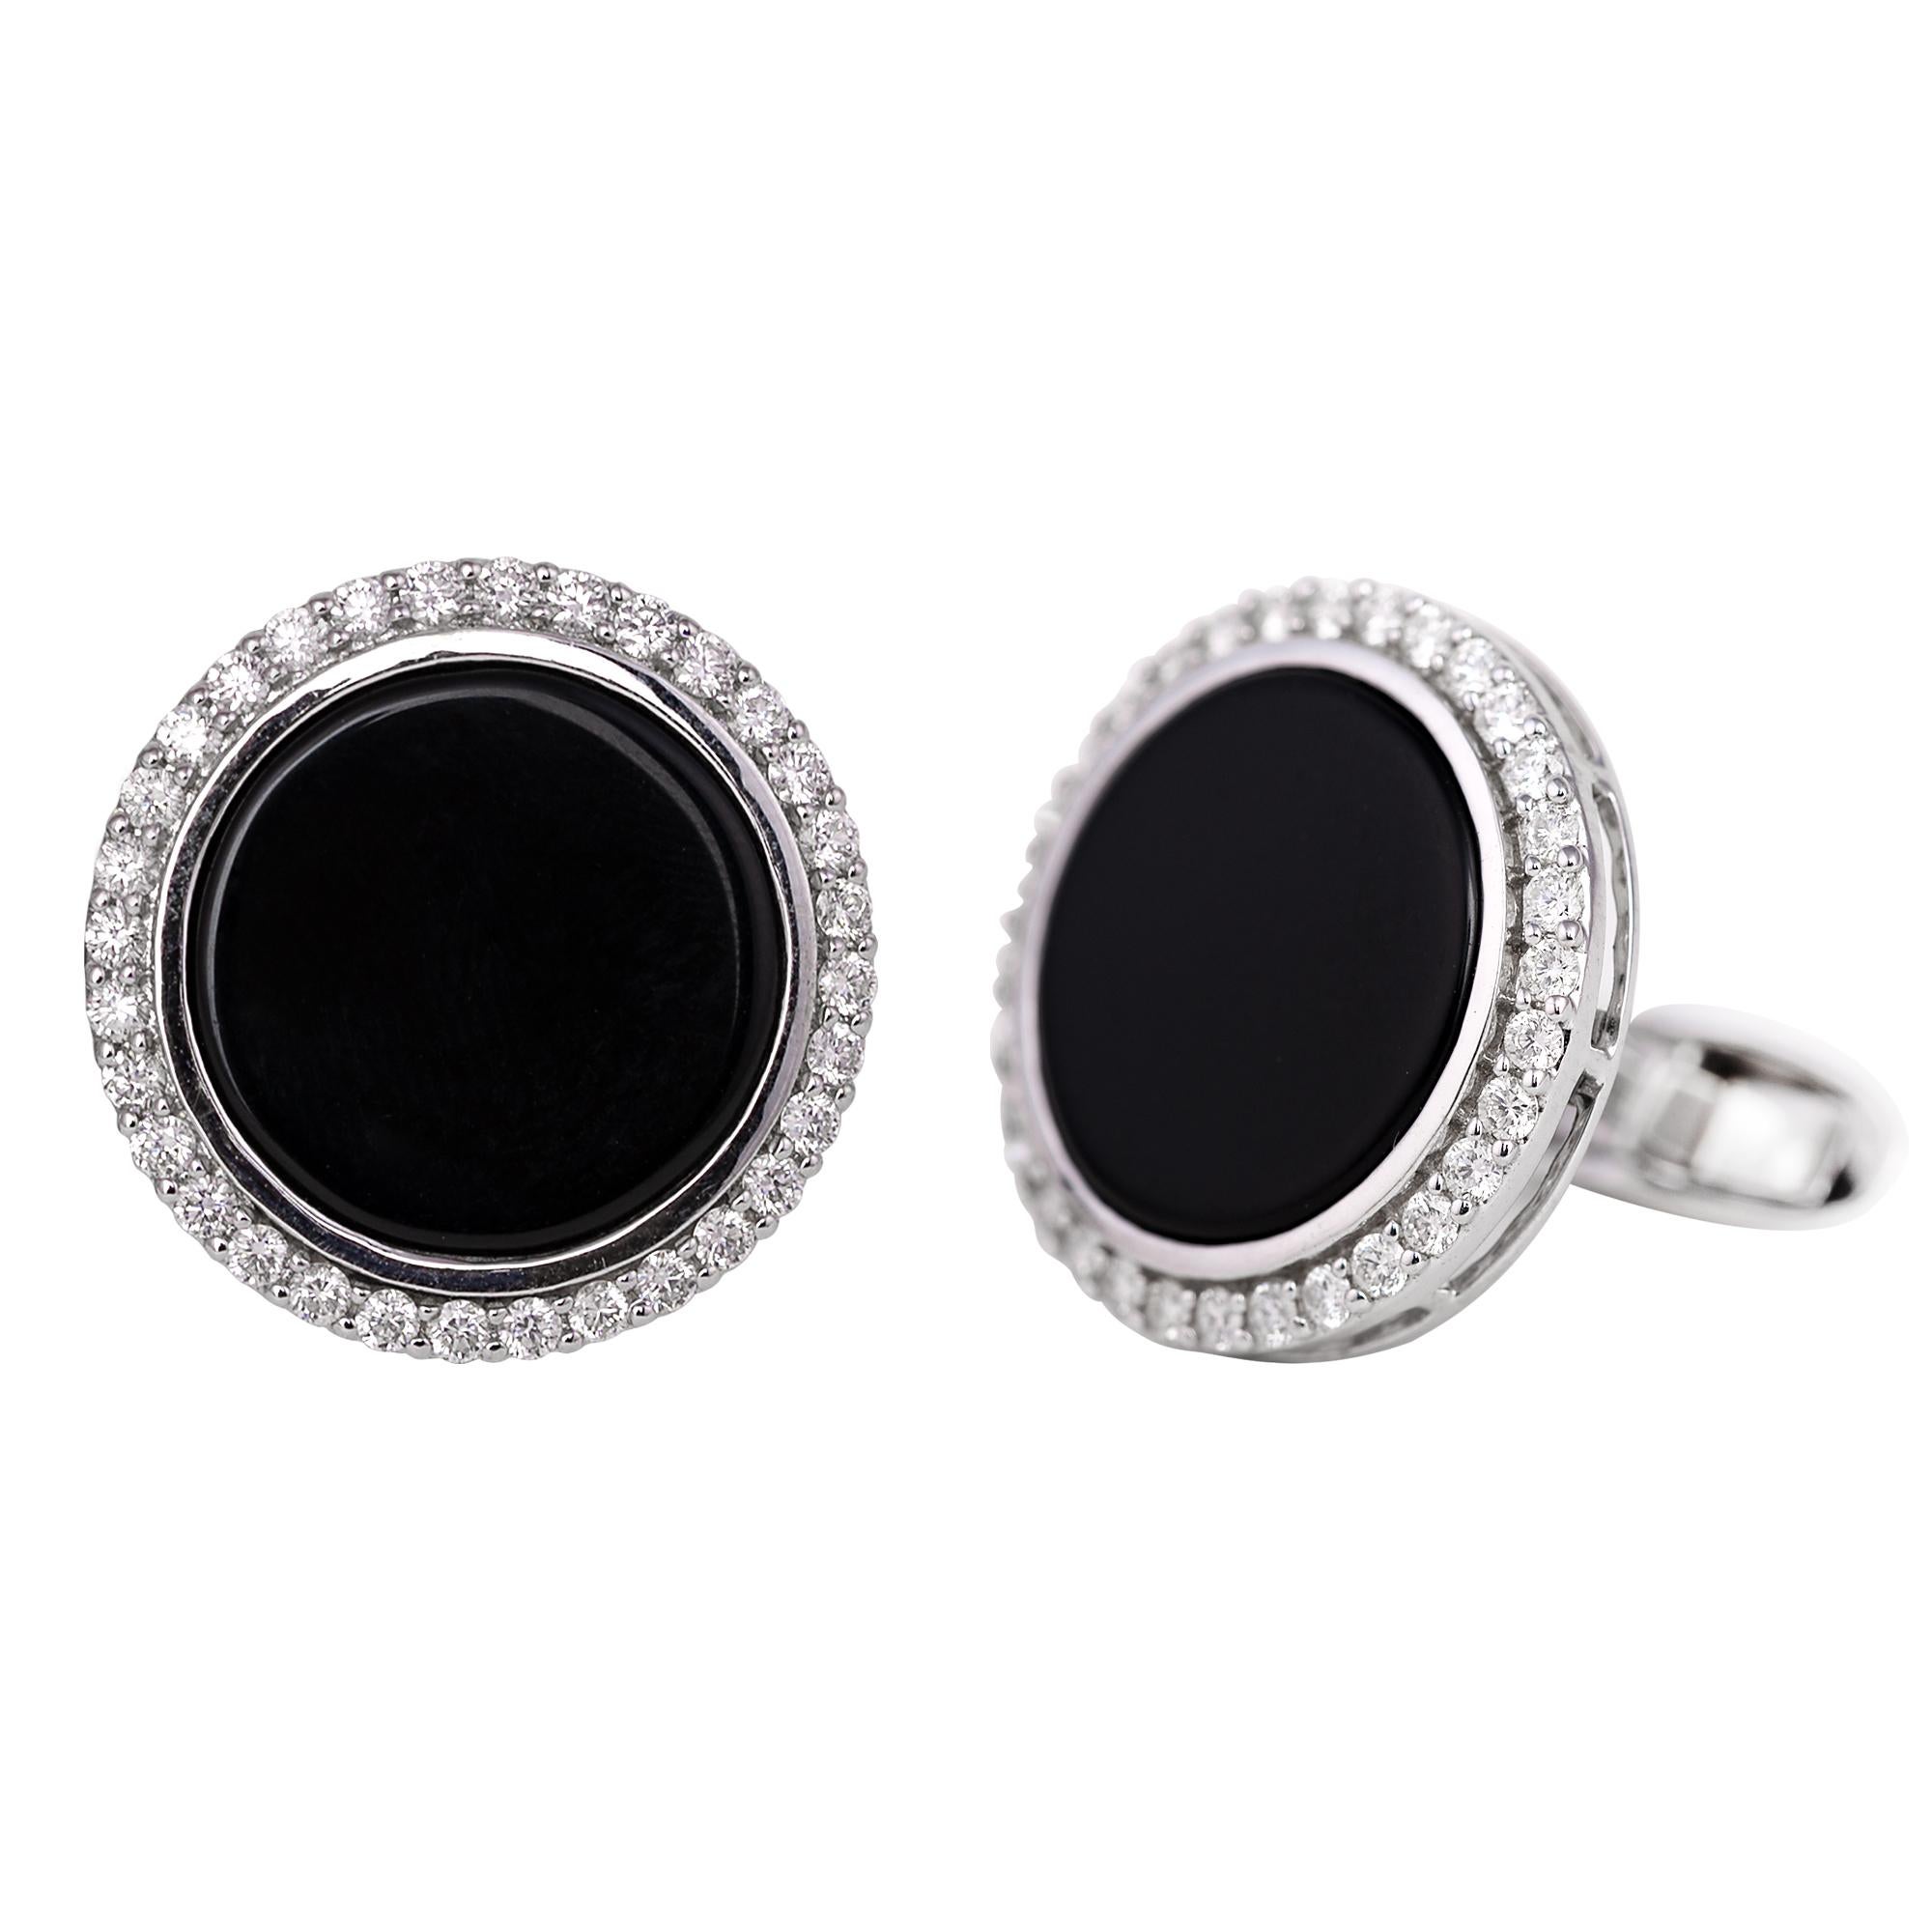 18 Karat White Gold 1.10 Carat Diamond and Black Onyx Cufflinks
This magnificent pitch black onyx and diamond cluster cufflink is timeless. The center solitaire curricular flat black onyx in closed bezel setting is glorified with the single row of